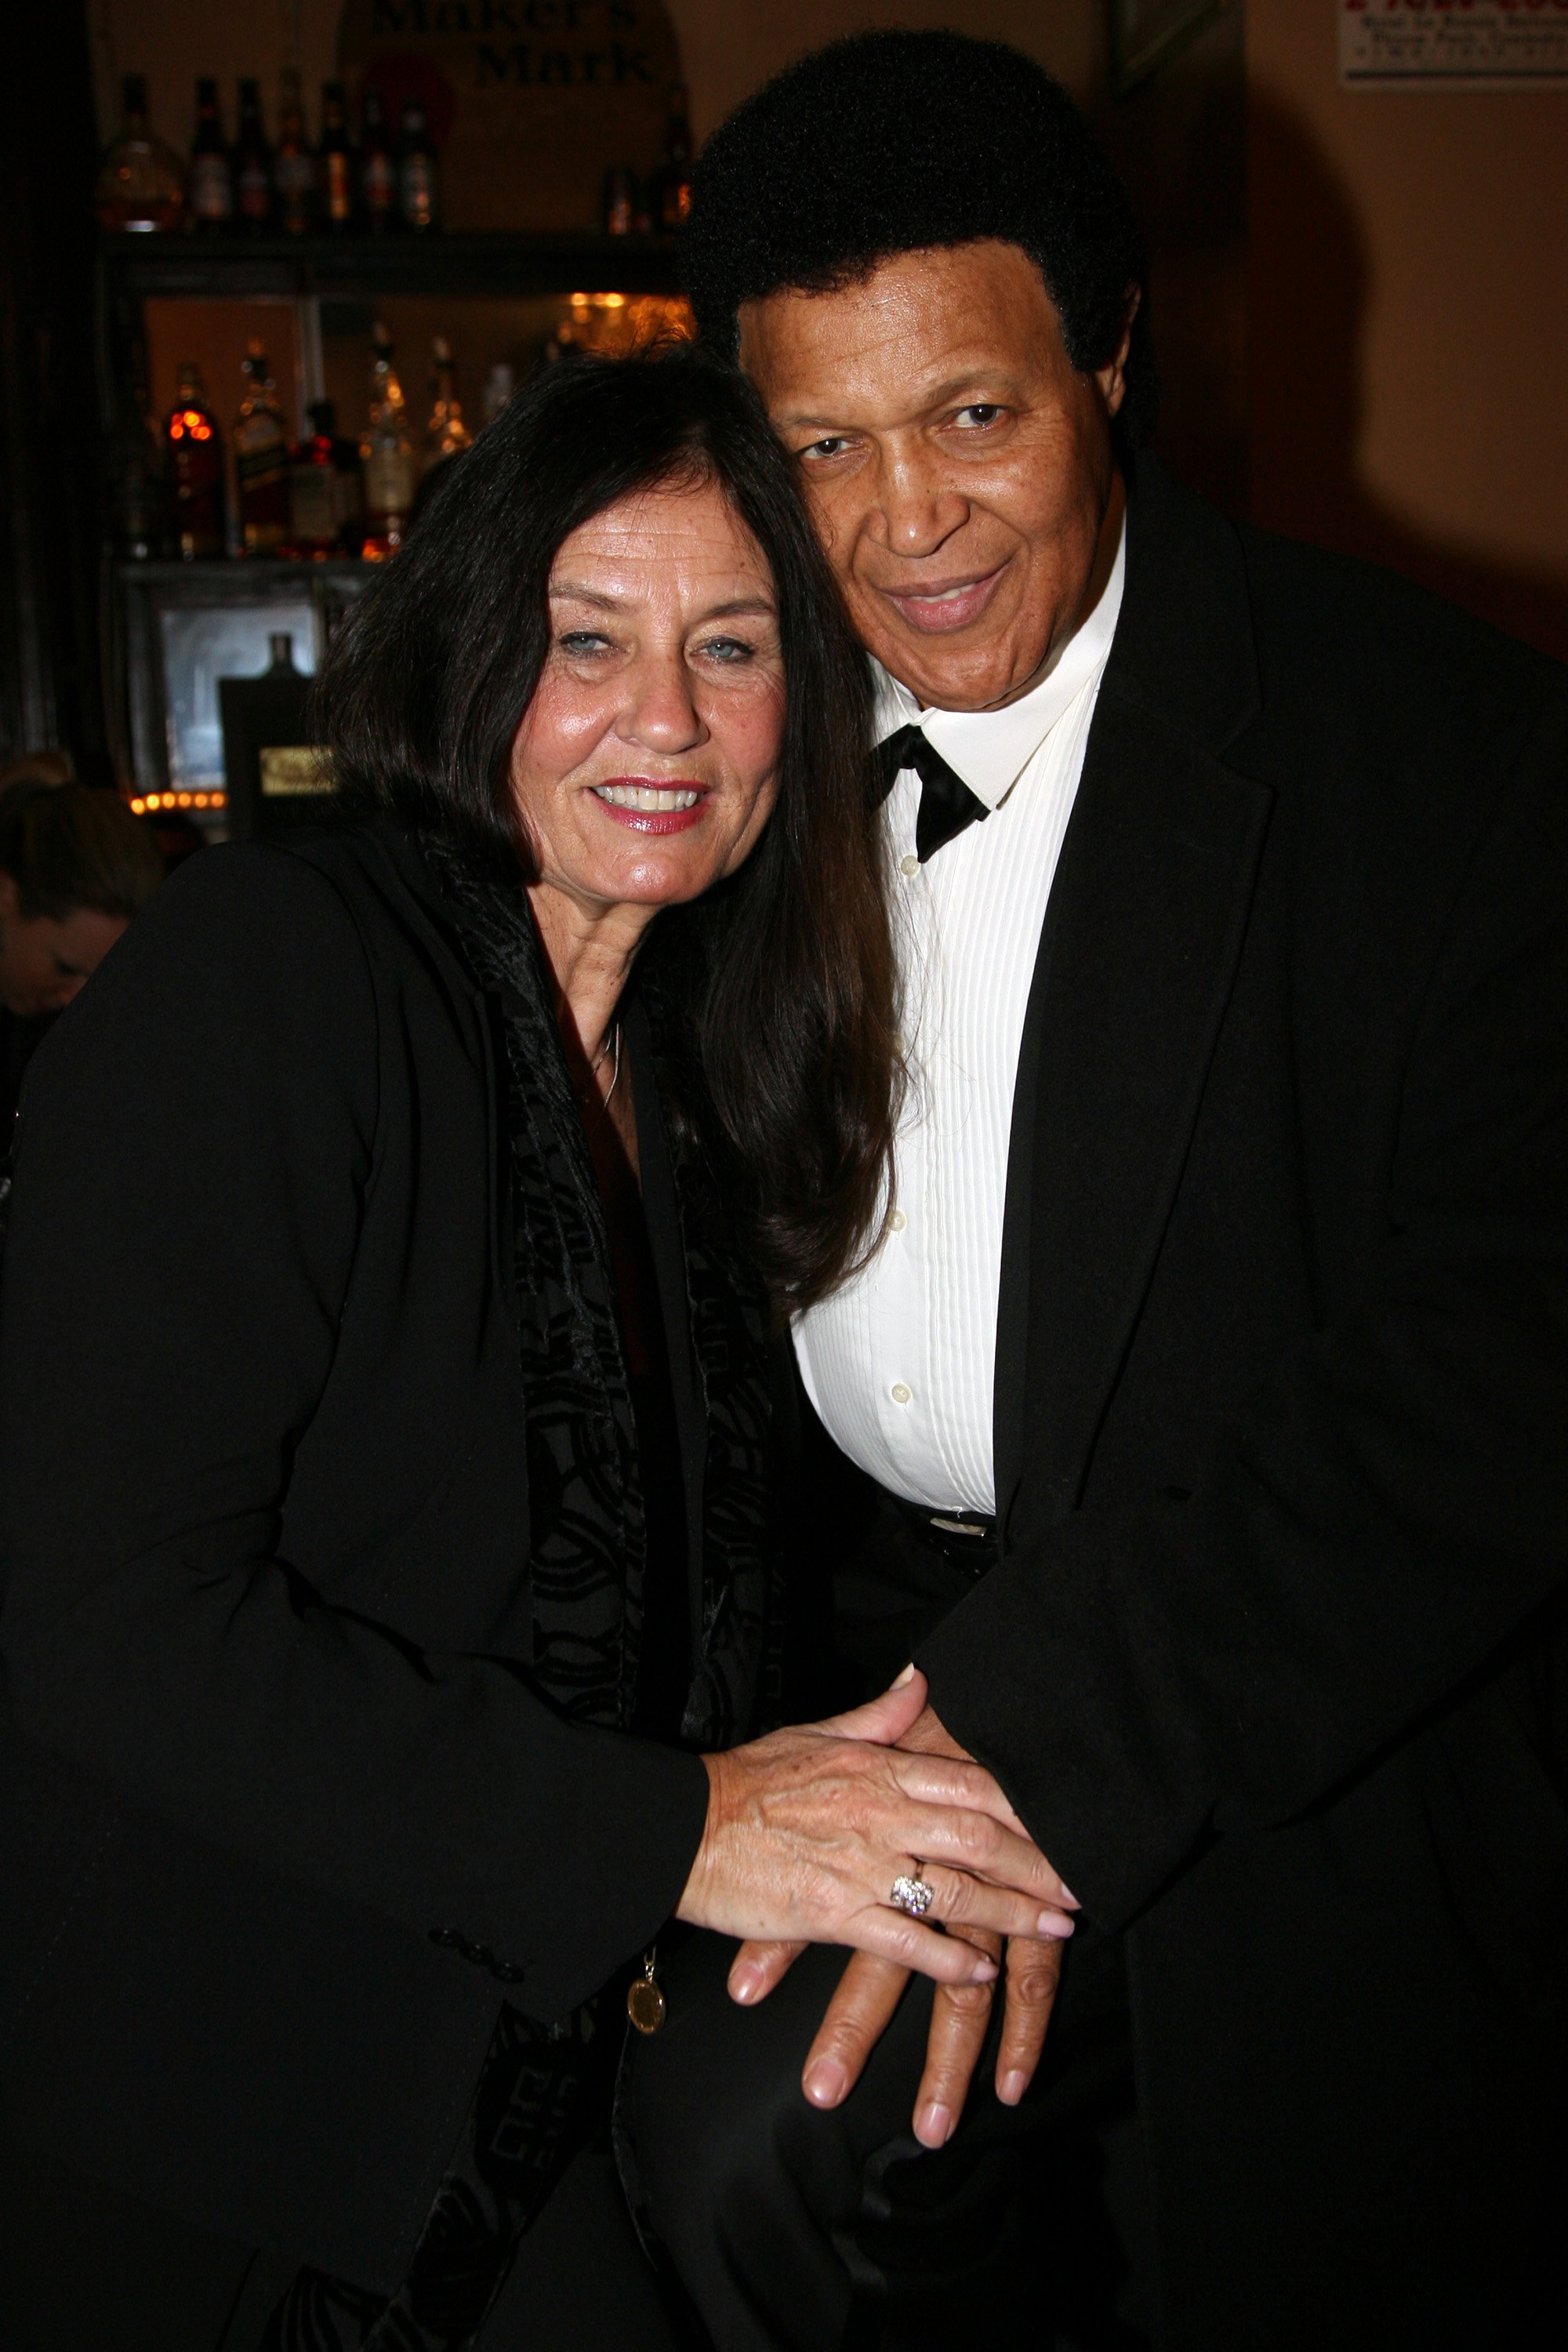 Chubby Checker in a photo with his wife, Catharina Lodders at the Cutting Room New York on March 6, 2008. | usage worldwide  Photo: Getty Images